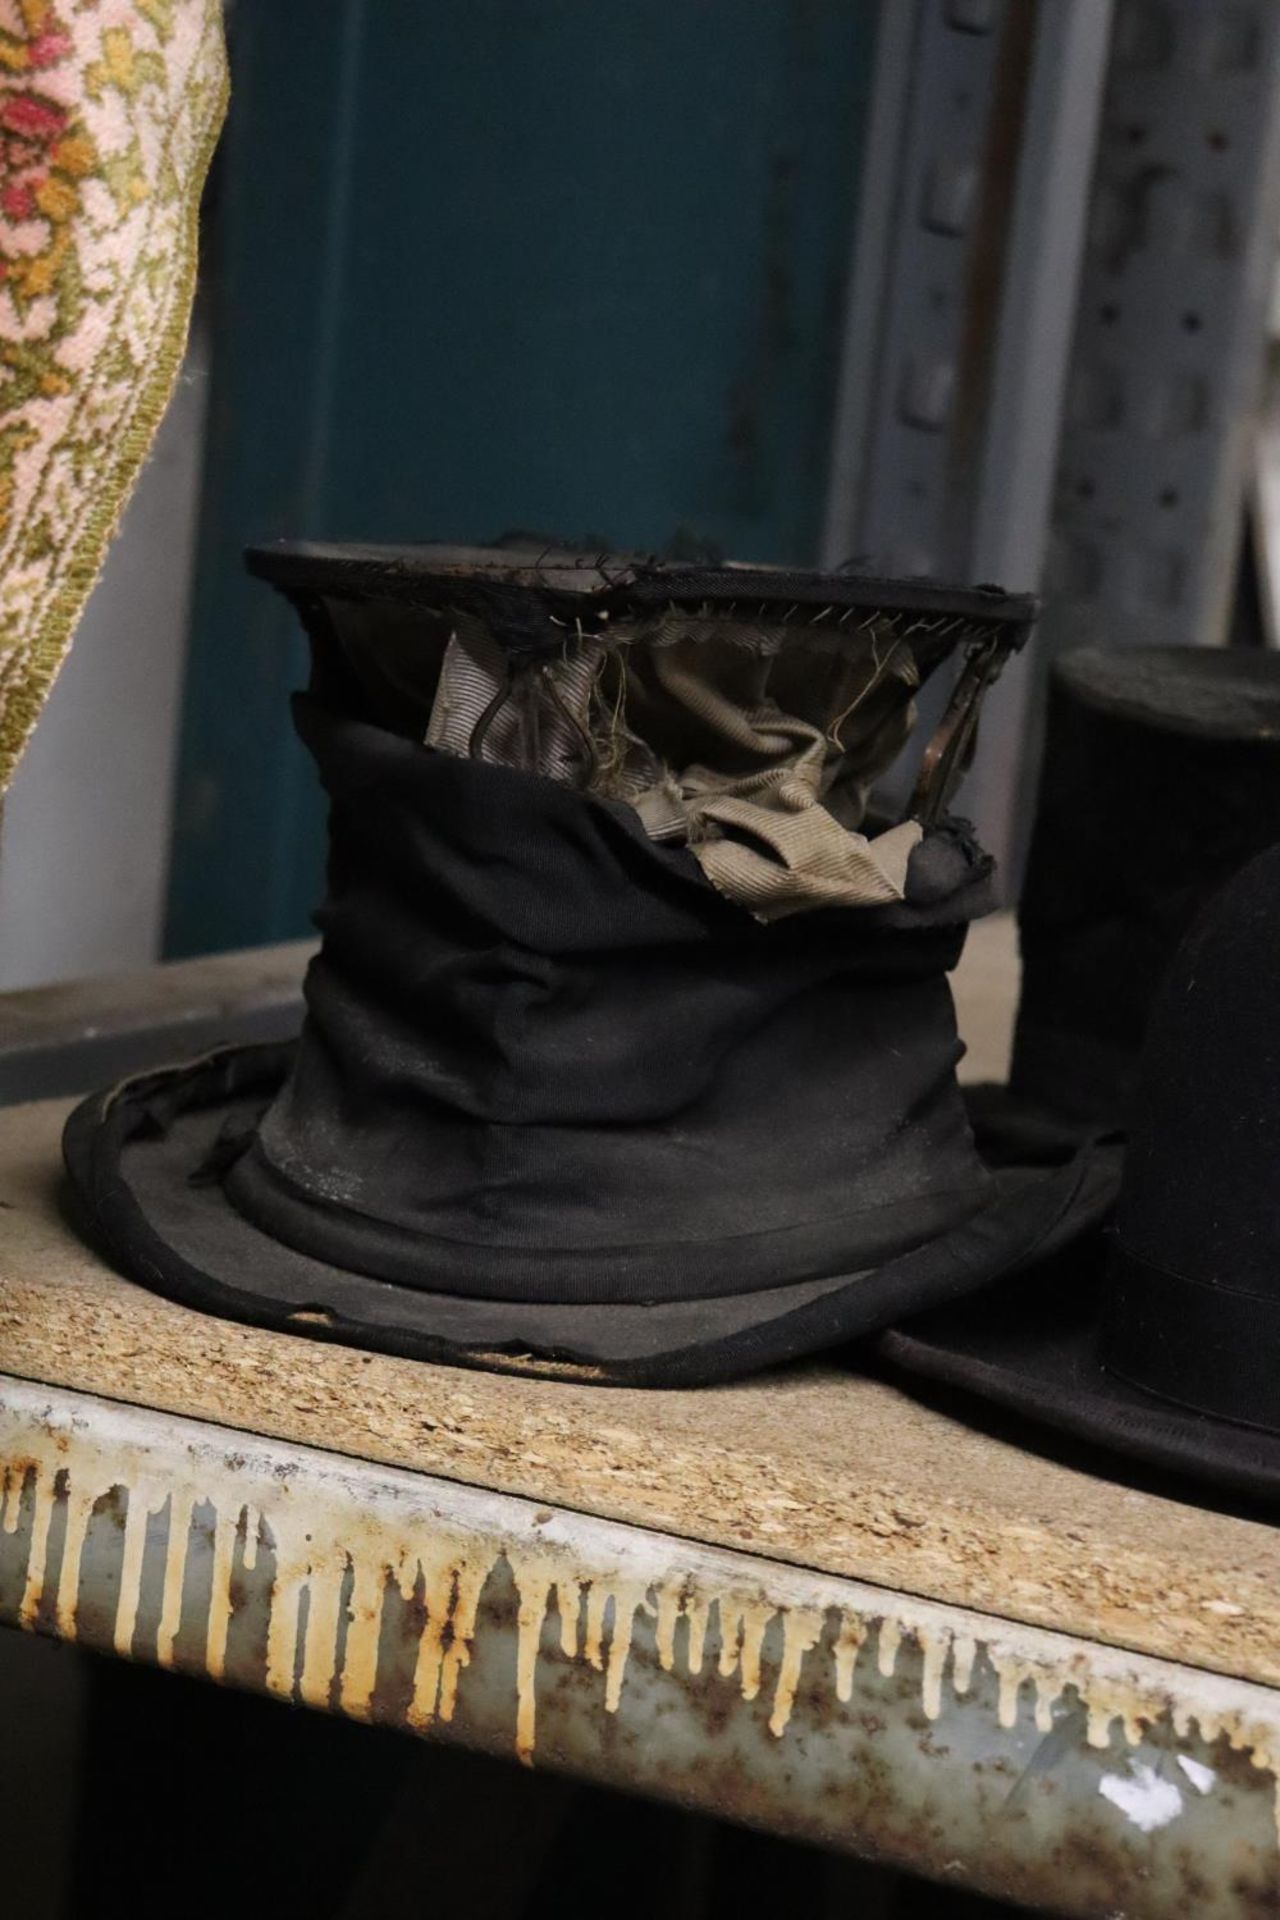 TWO VINTAGE TOP HATS AND A BOWLER HAT - TOP HATS A/F - Bild 2 aus 6